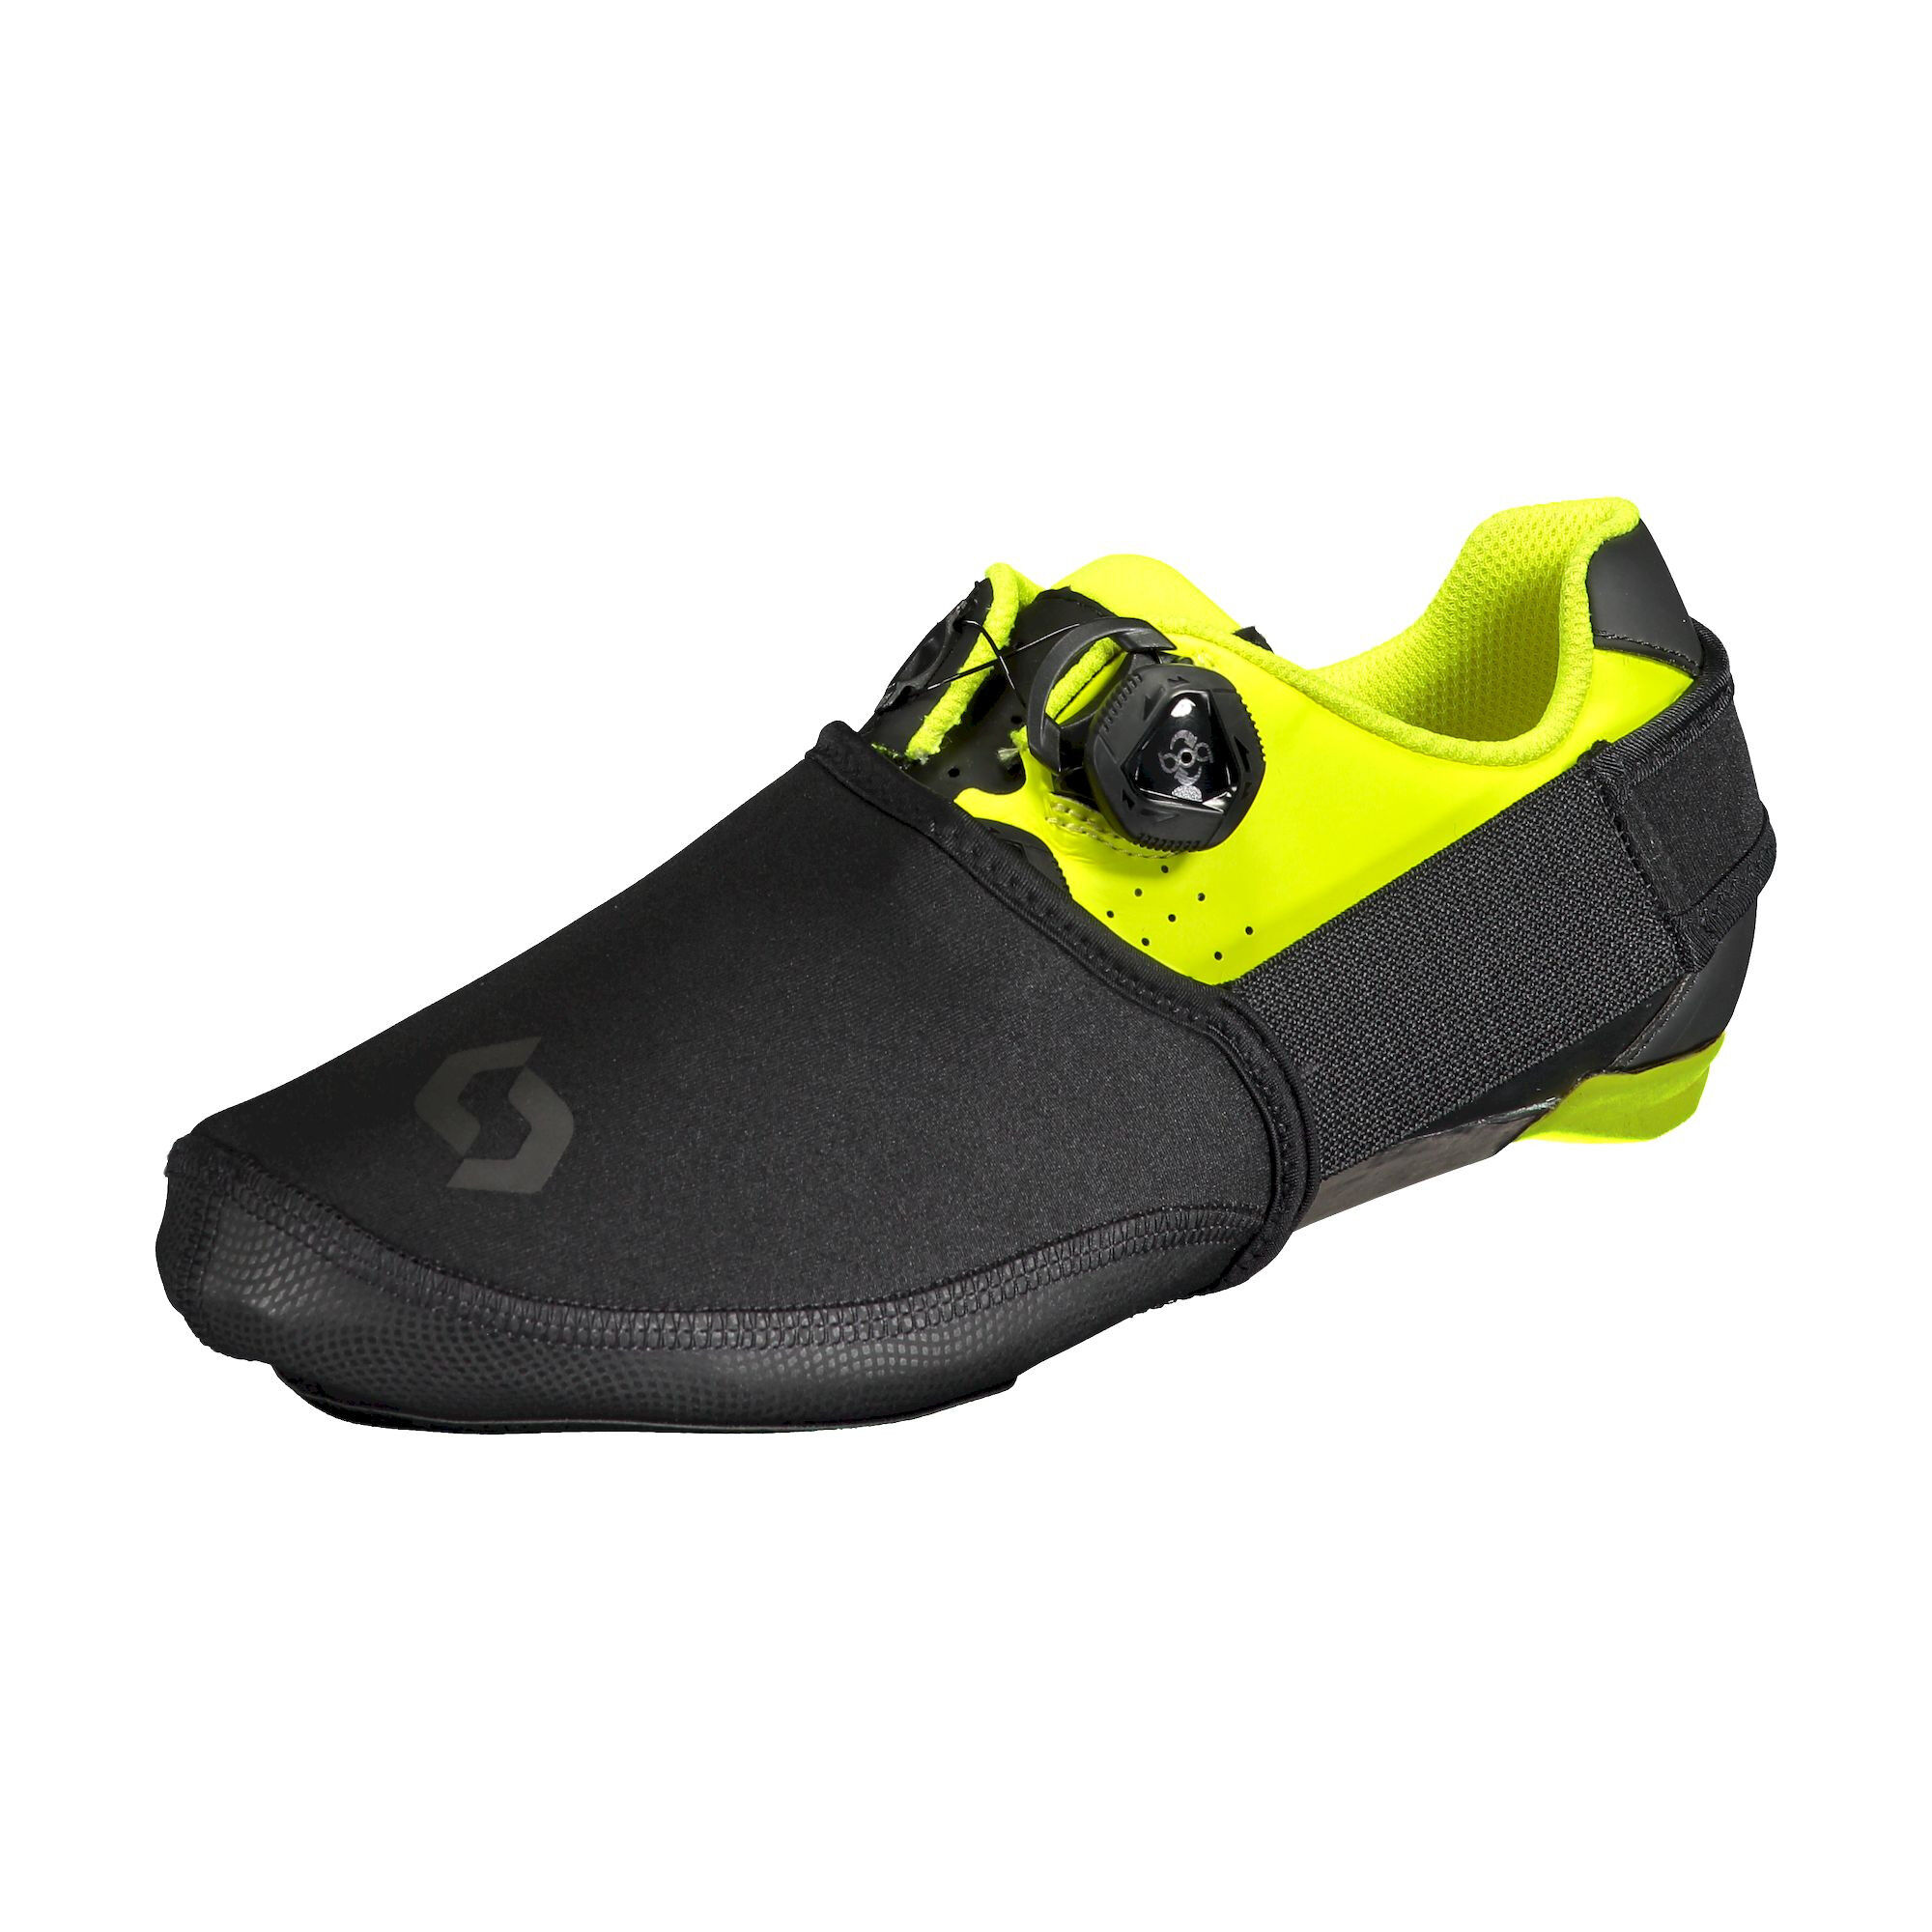 Scott AS 10 Long Toecover - Sur-chaussures vélo | Hardloop